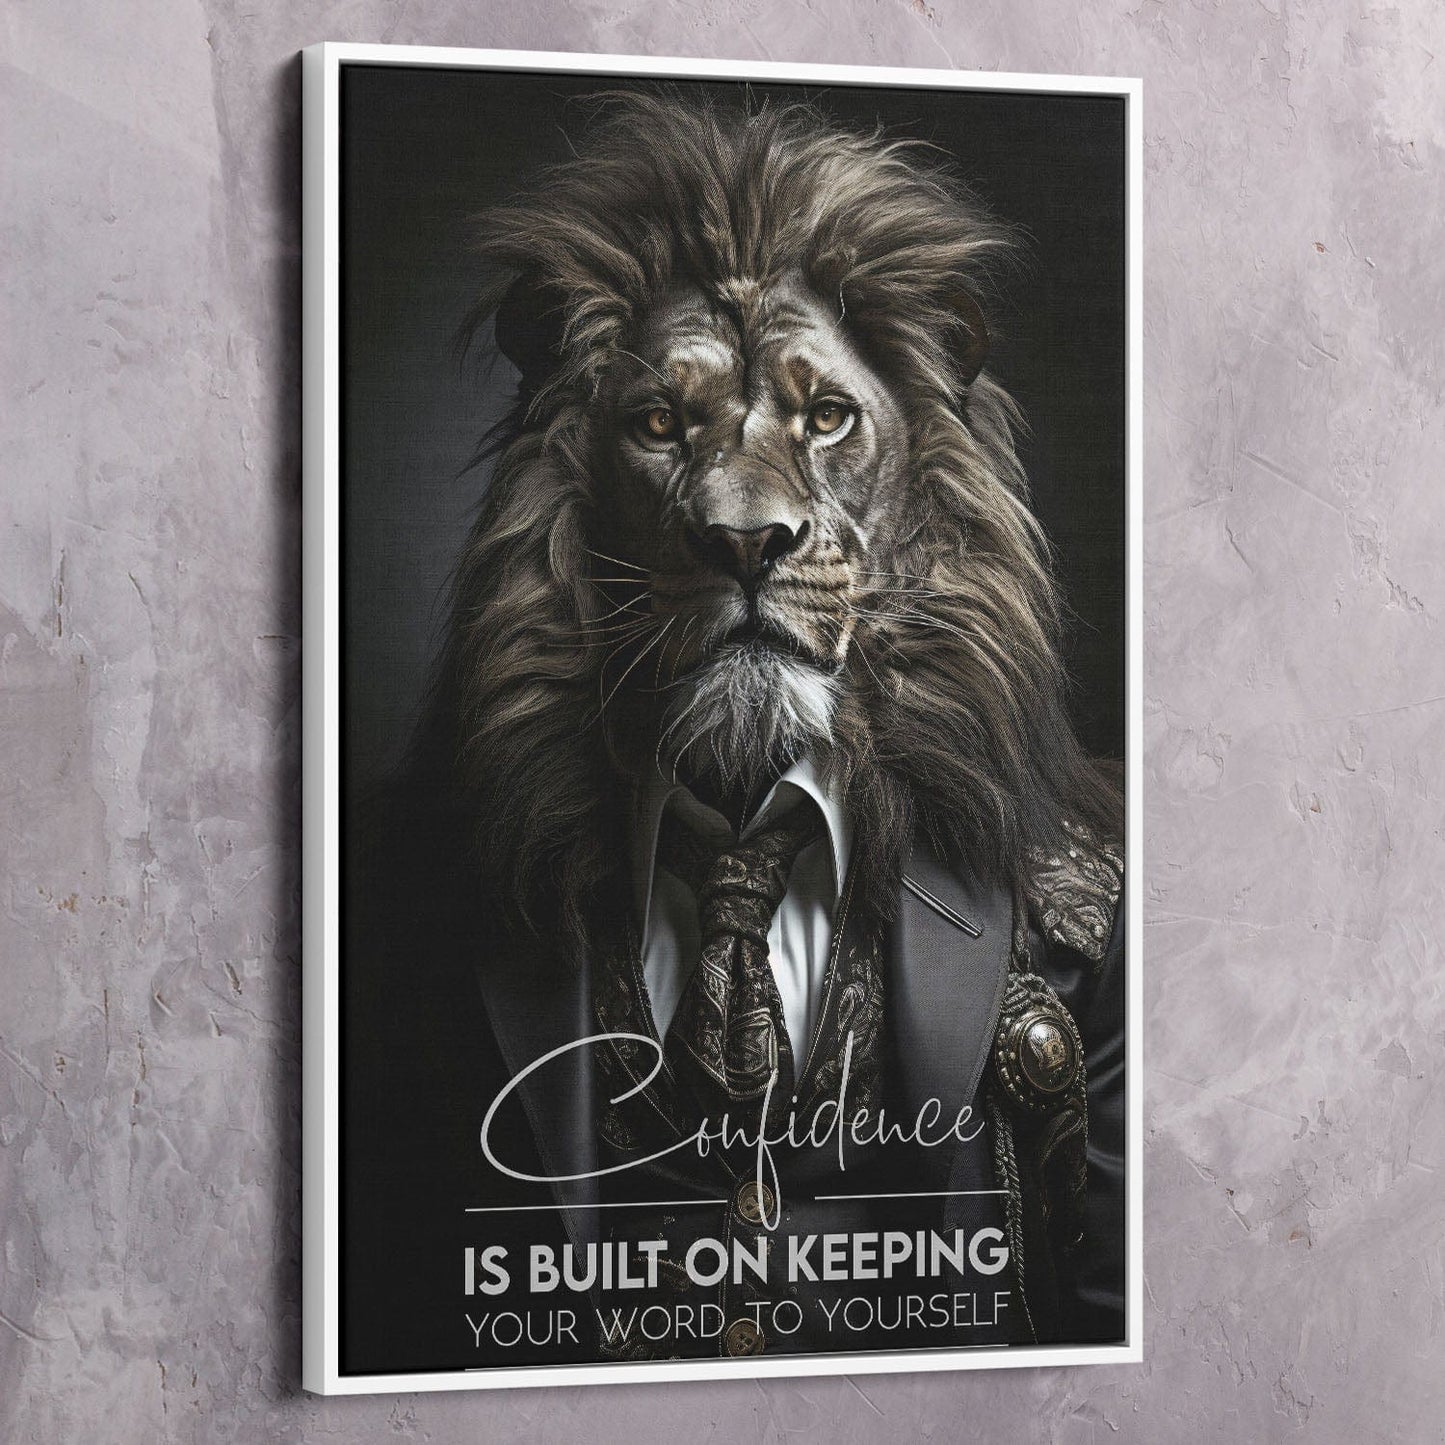 Confidence is Built on Keeping Your Word to Yourself Wall Art | Inspirational Wall Art Motivational Wall Art Quotes Office Art | ImpaktMaker Exclusive Canvas Art Portrait